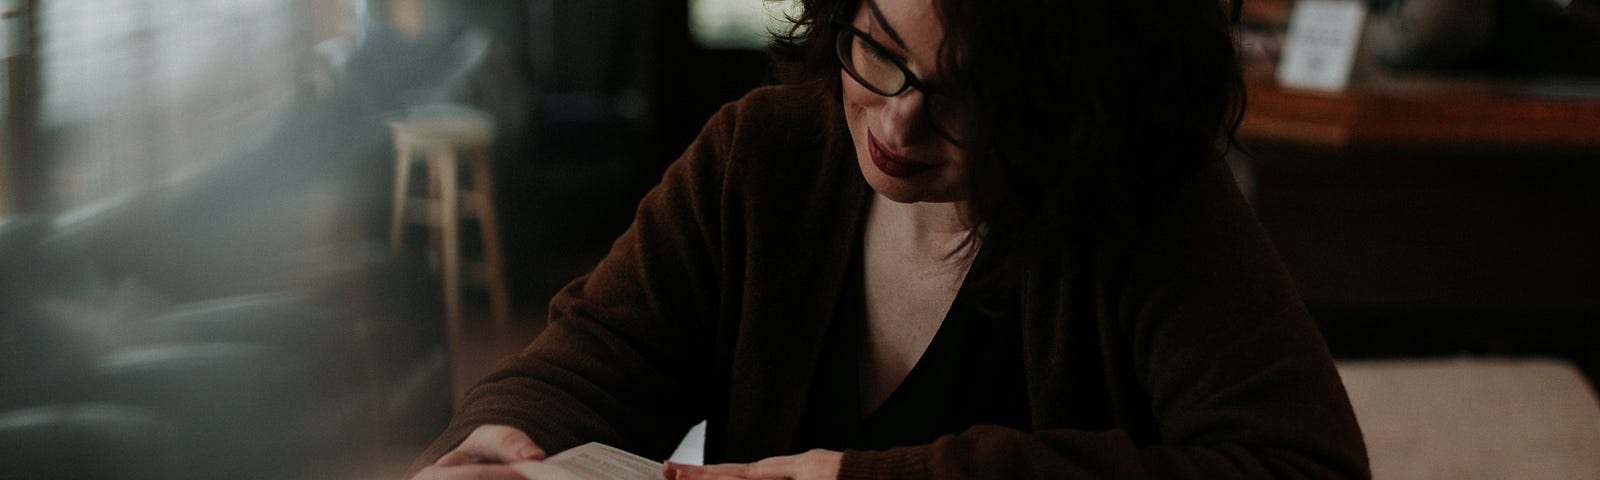 A woman wearing glasses reading a book at a desk